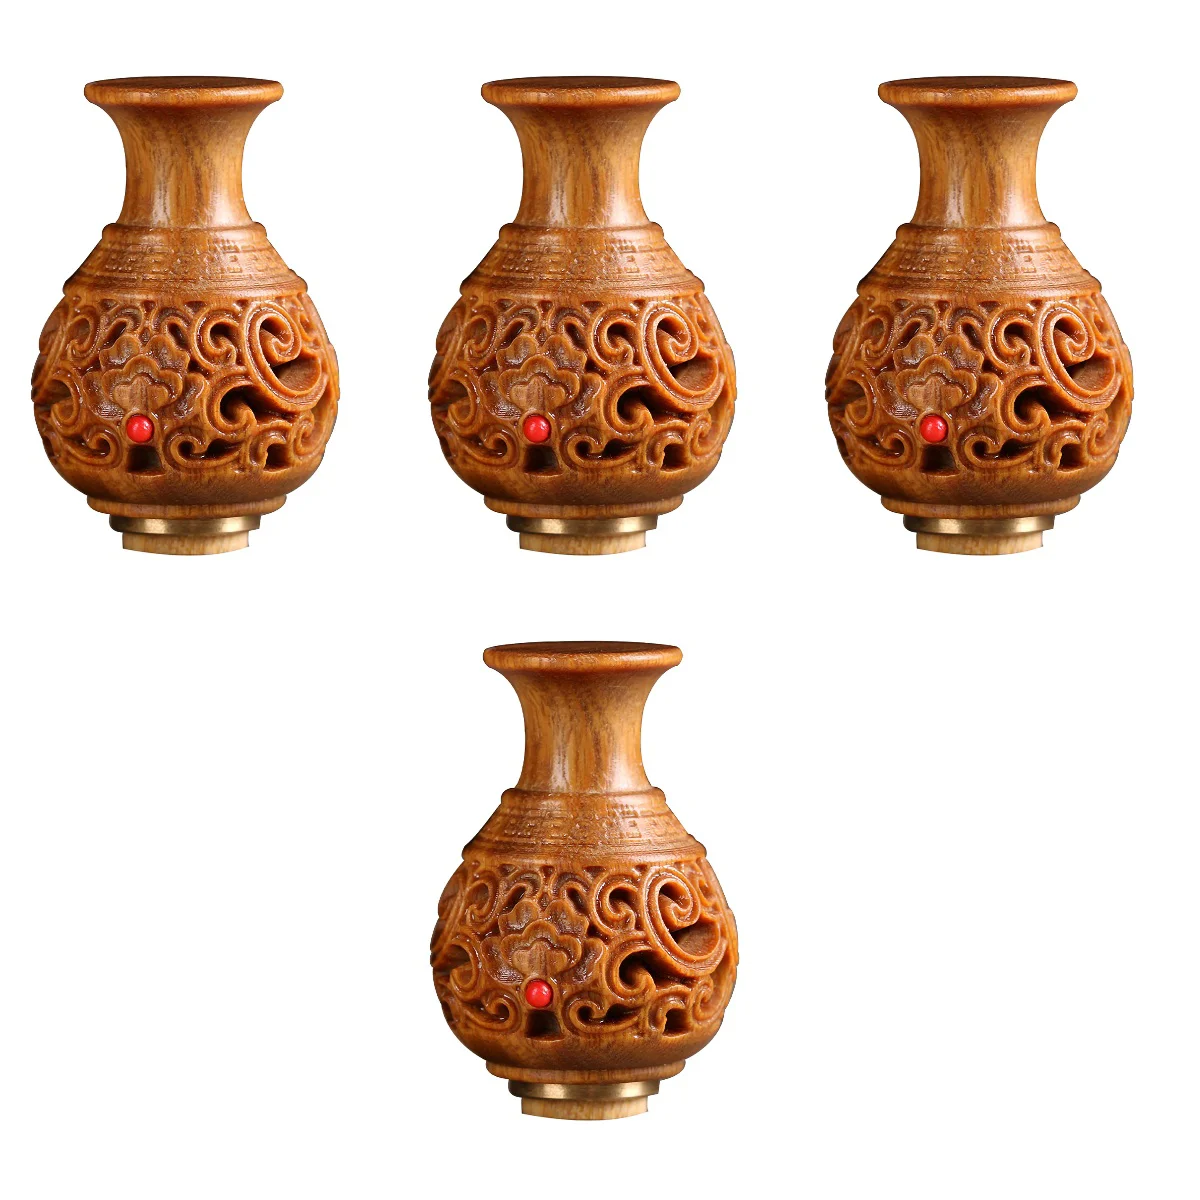 

4x Exquisite Creative Elegant Premium Lasting Wood Diffuser Openable Aroma Beads Holder for Car Ornament Home Decor Gift Option